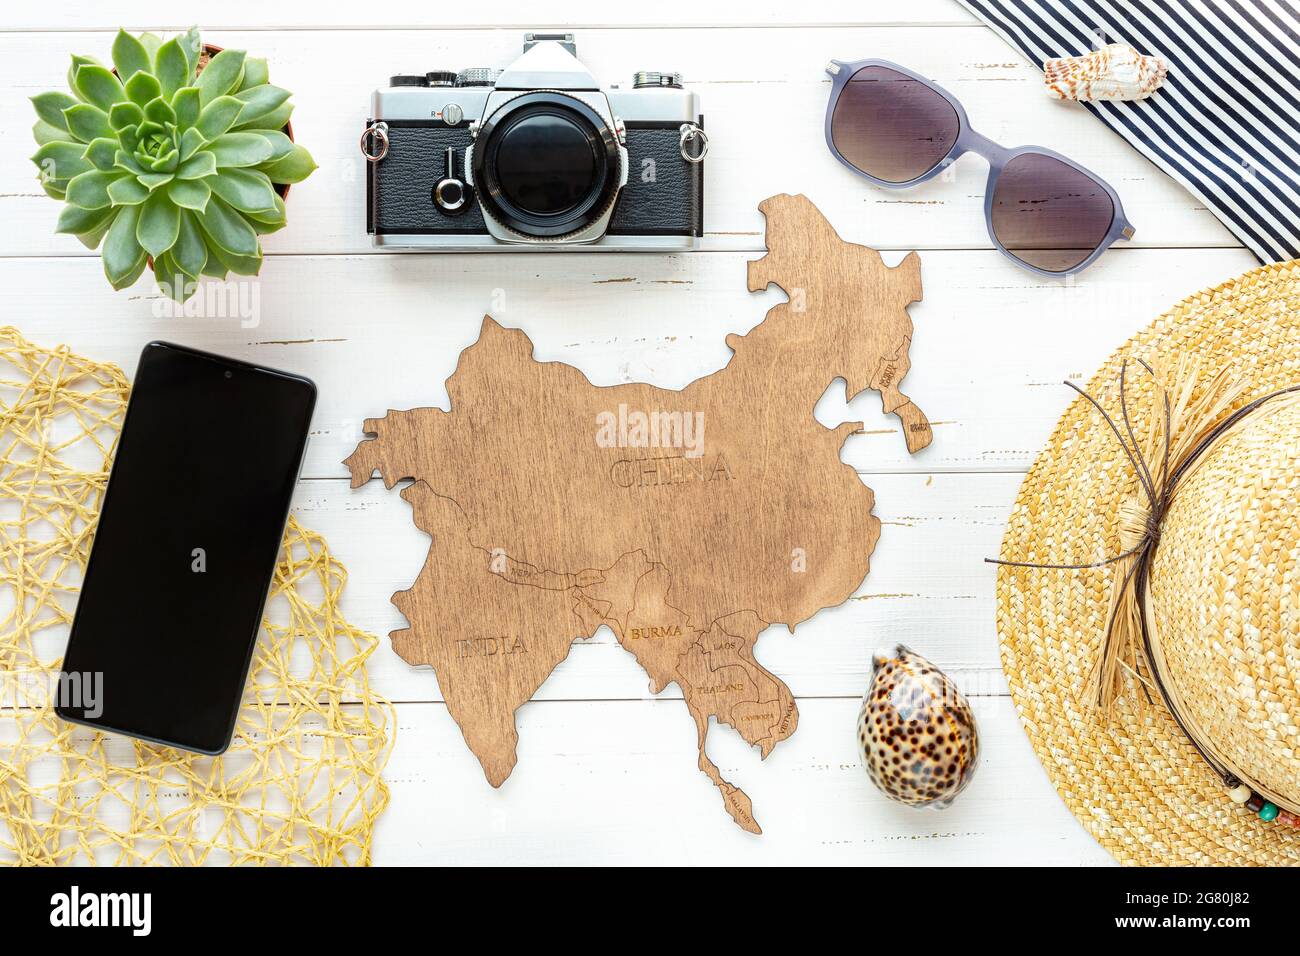 Tourist destinations to Asian tropical countries. On a white background wooden map with countries - China, India, Korea, Vietnam, Cambodia, and others Stock Photo